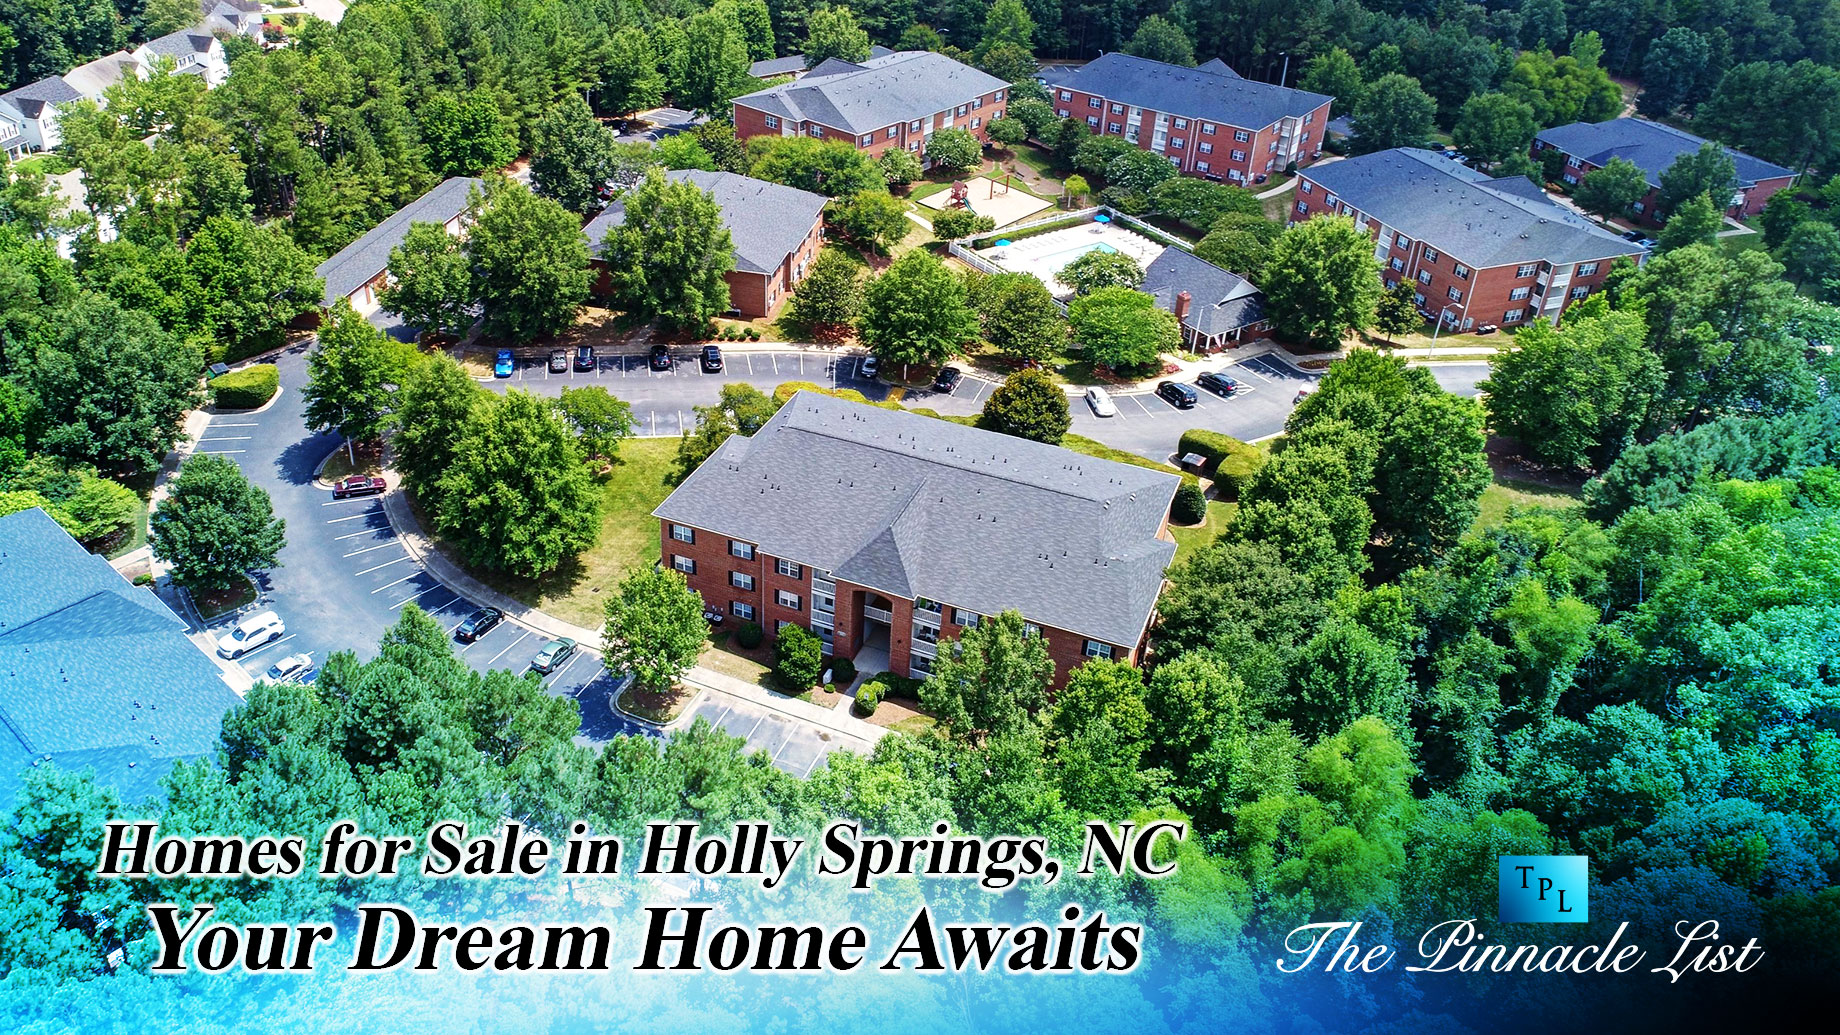 Homes for Sale in Holly Springs, NC: Your Dream Home Awaits